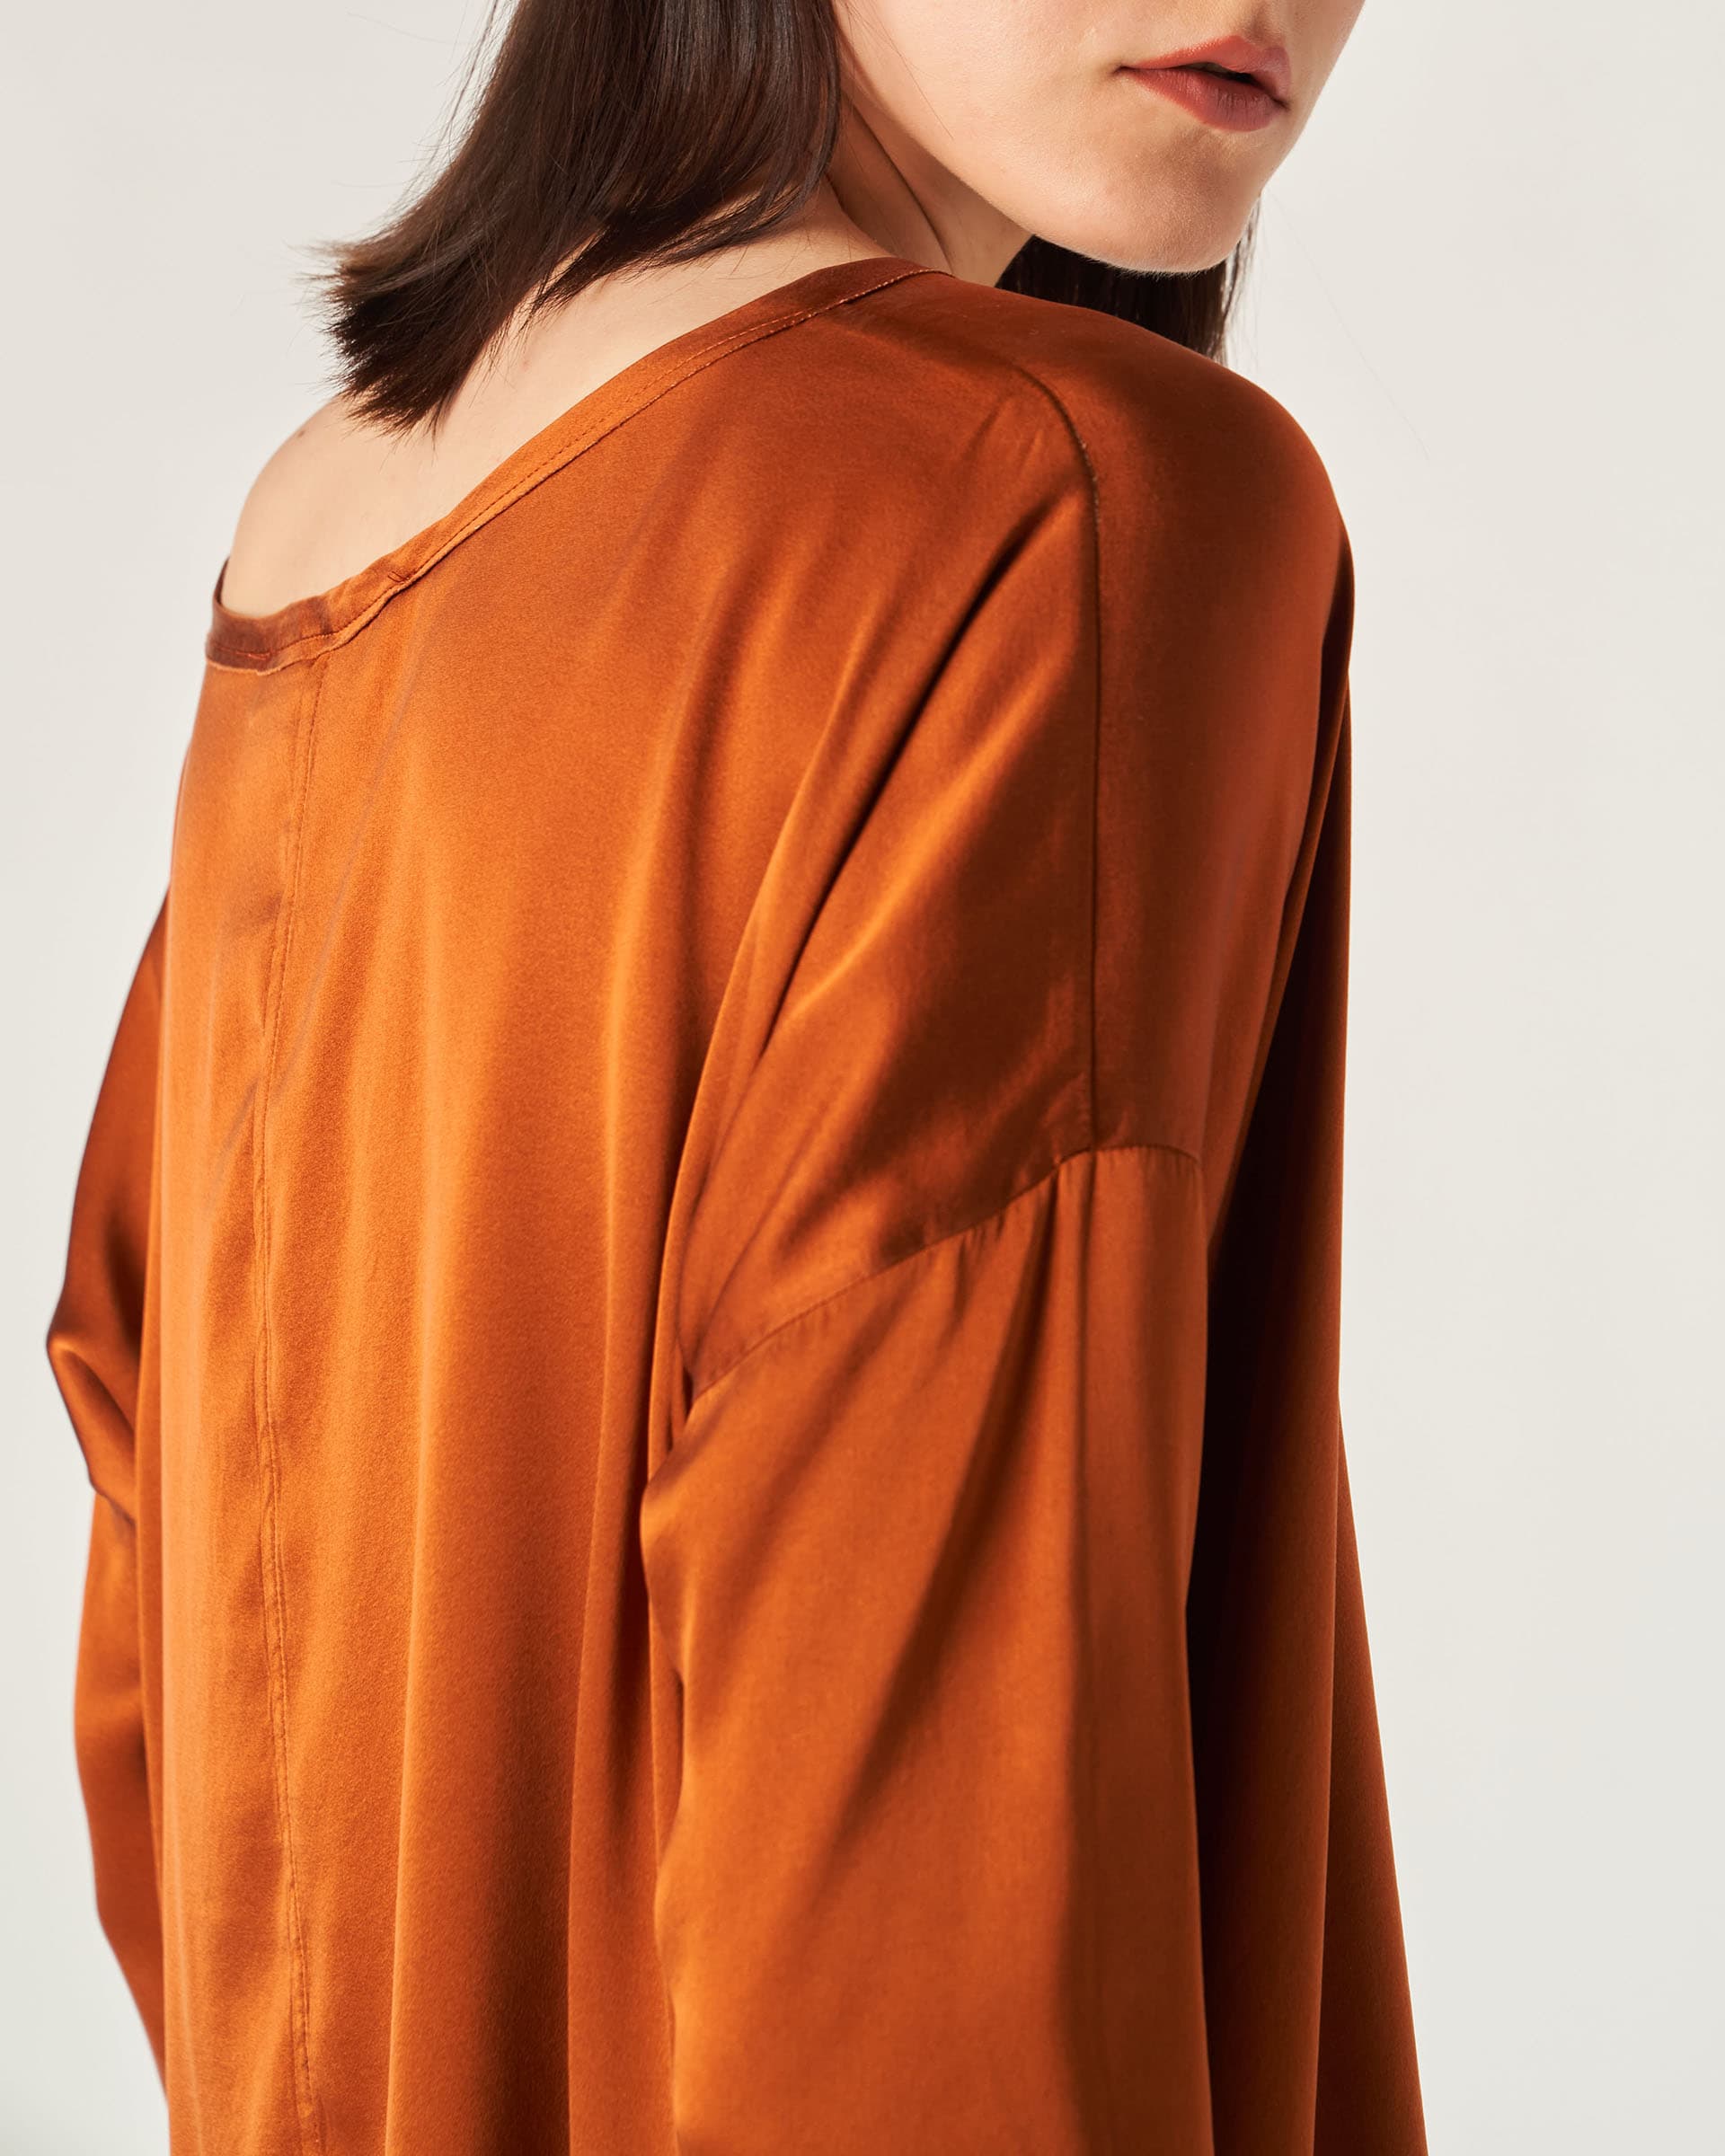 The Market Store | Satin Boxie Top